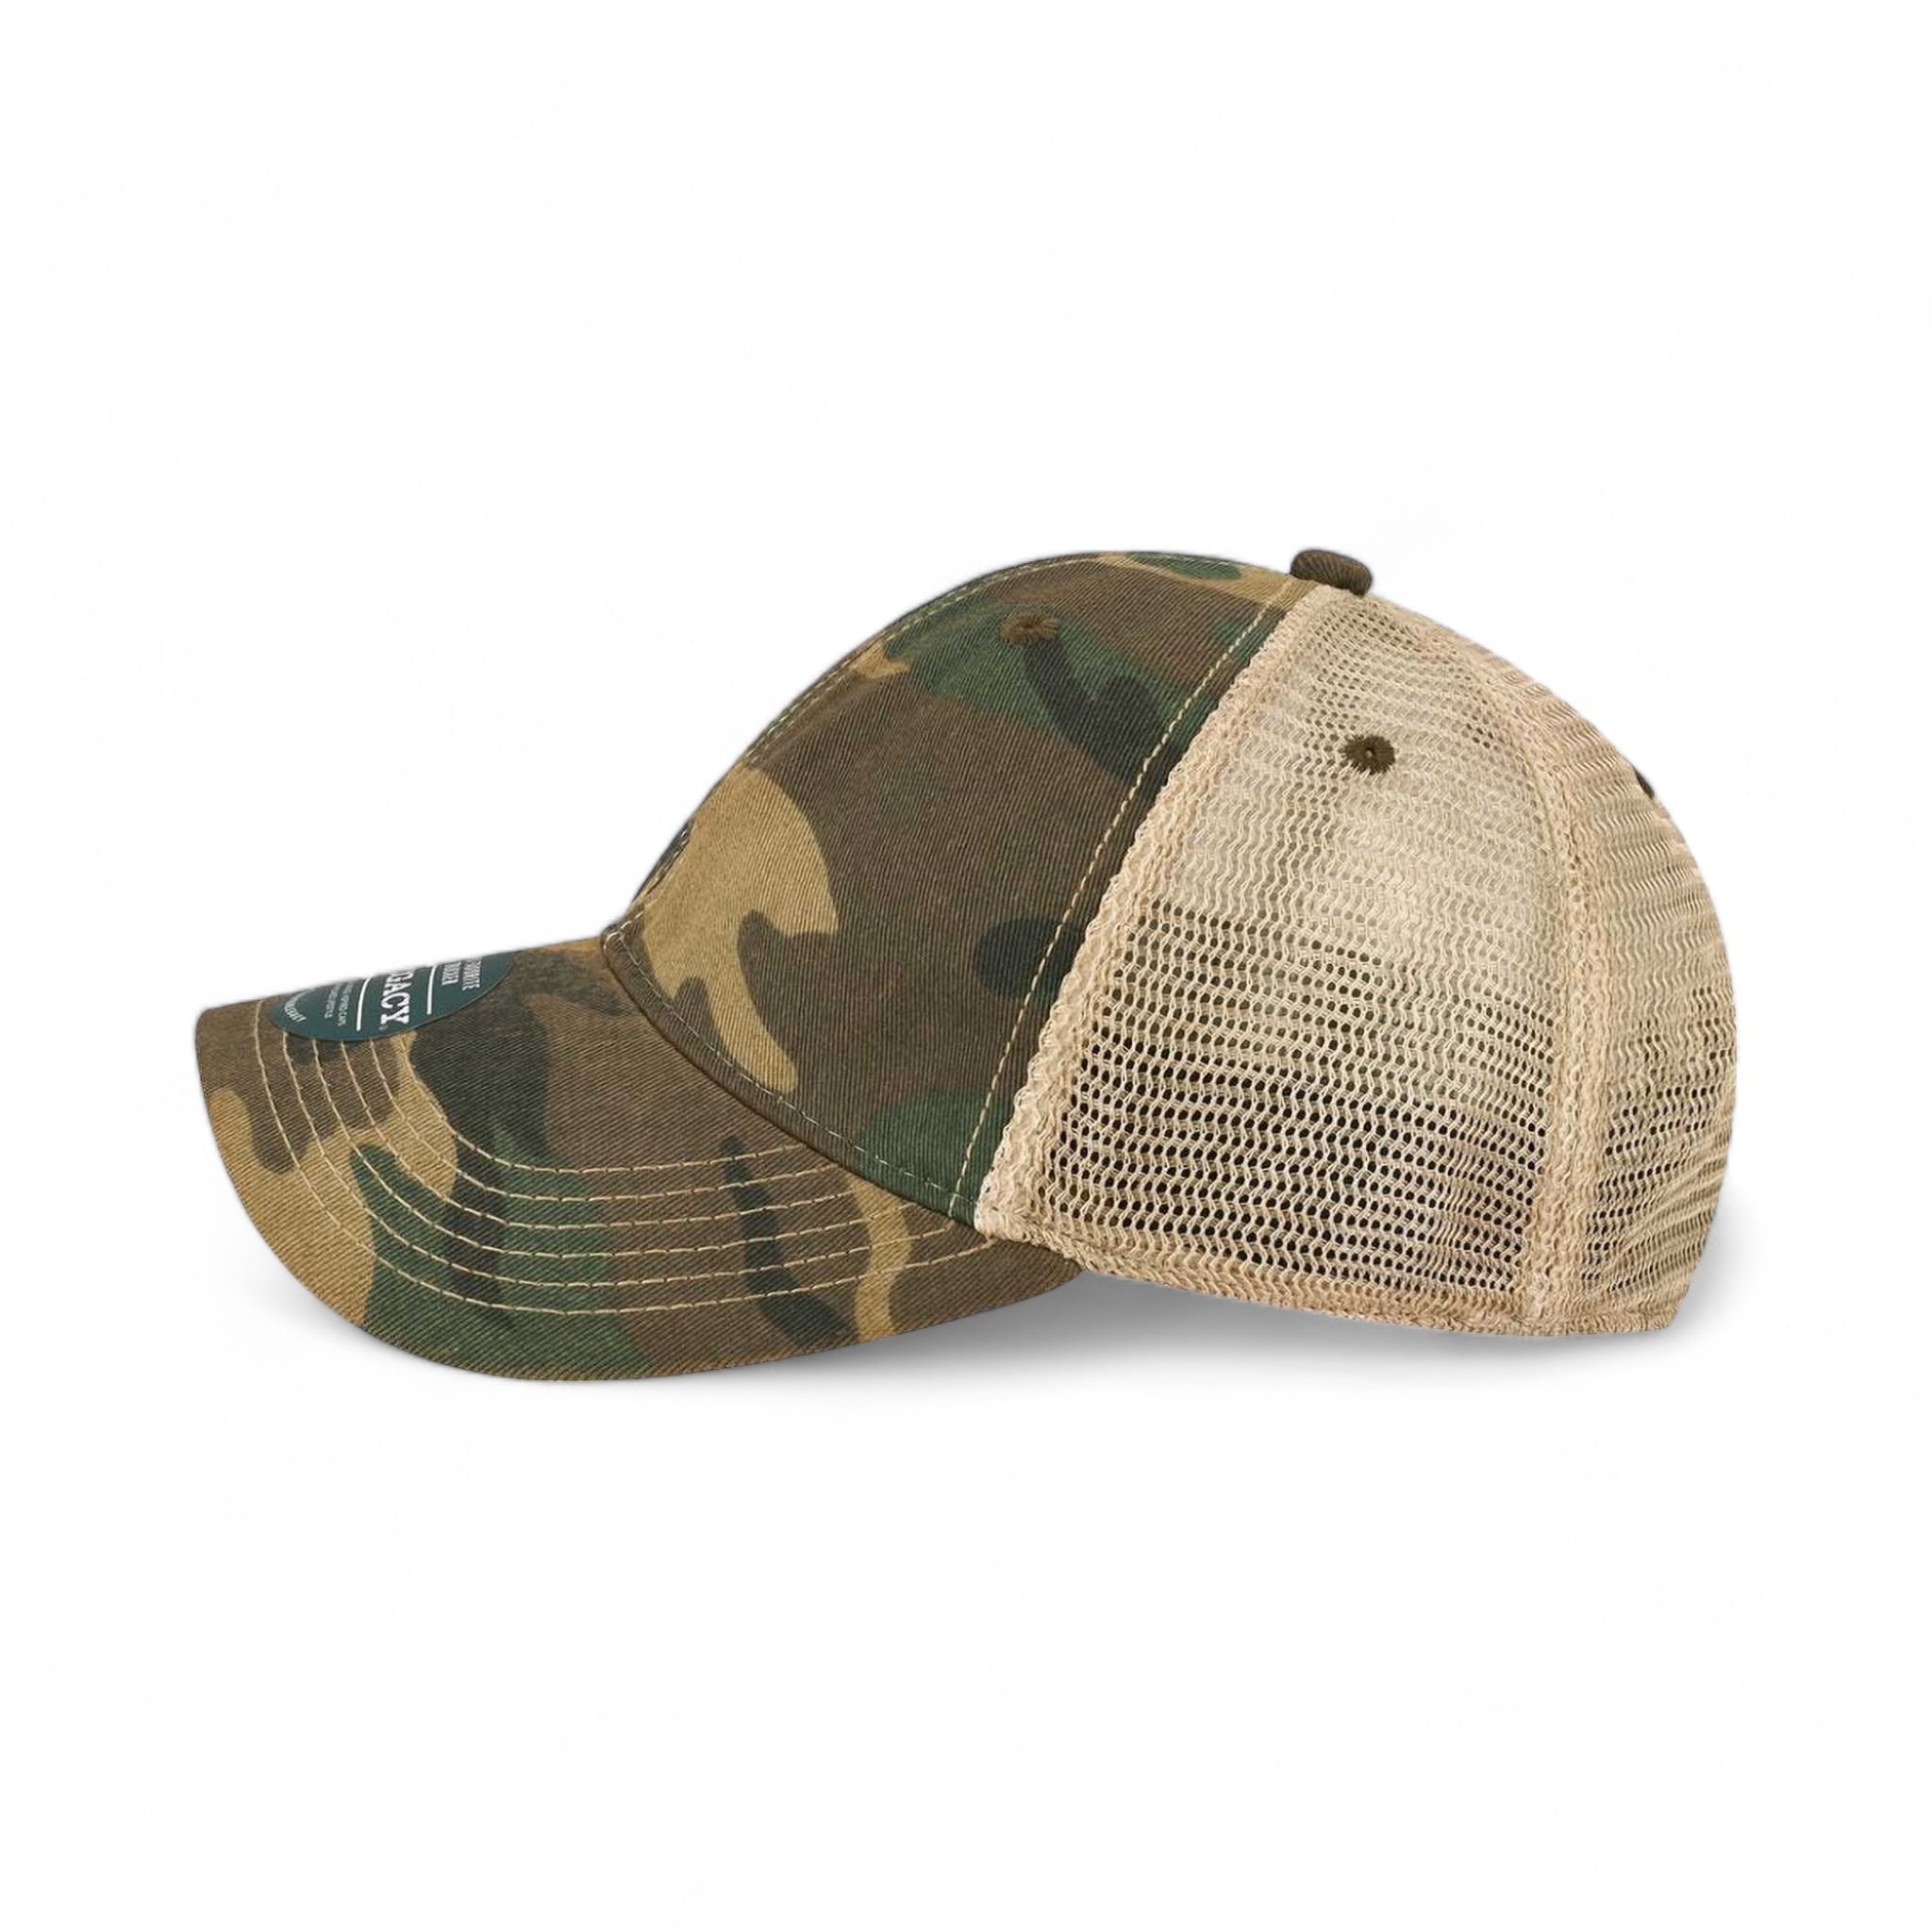 Side view of LEGACY OFAY custom hat in army camo and khaki